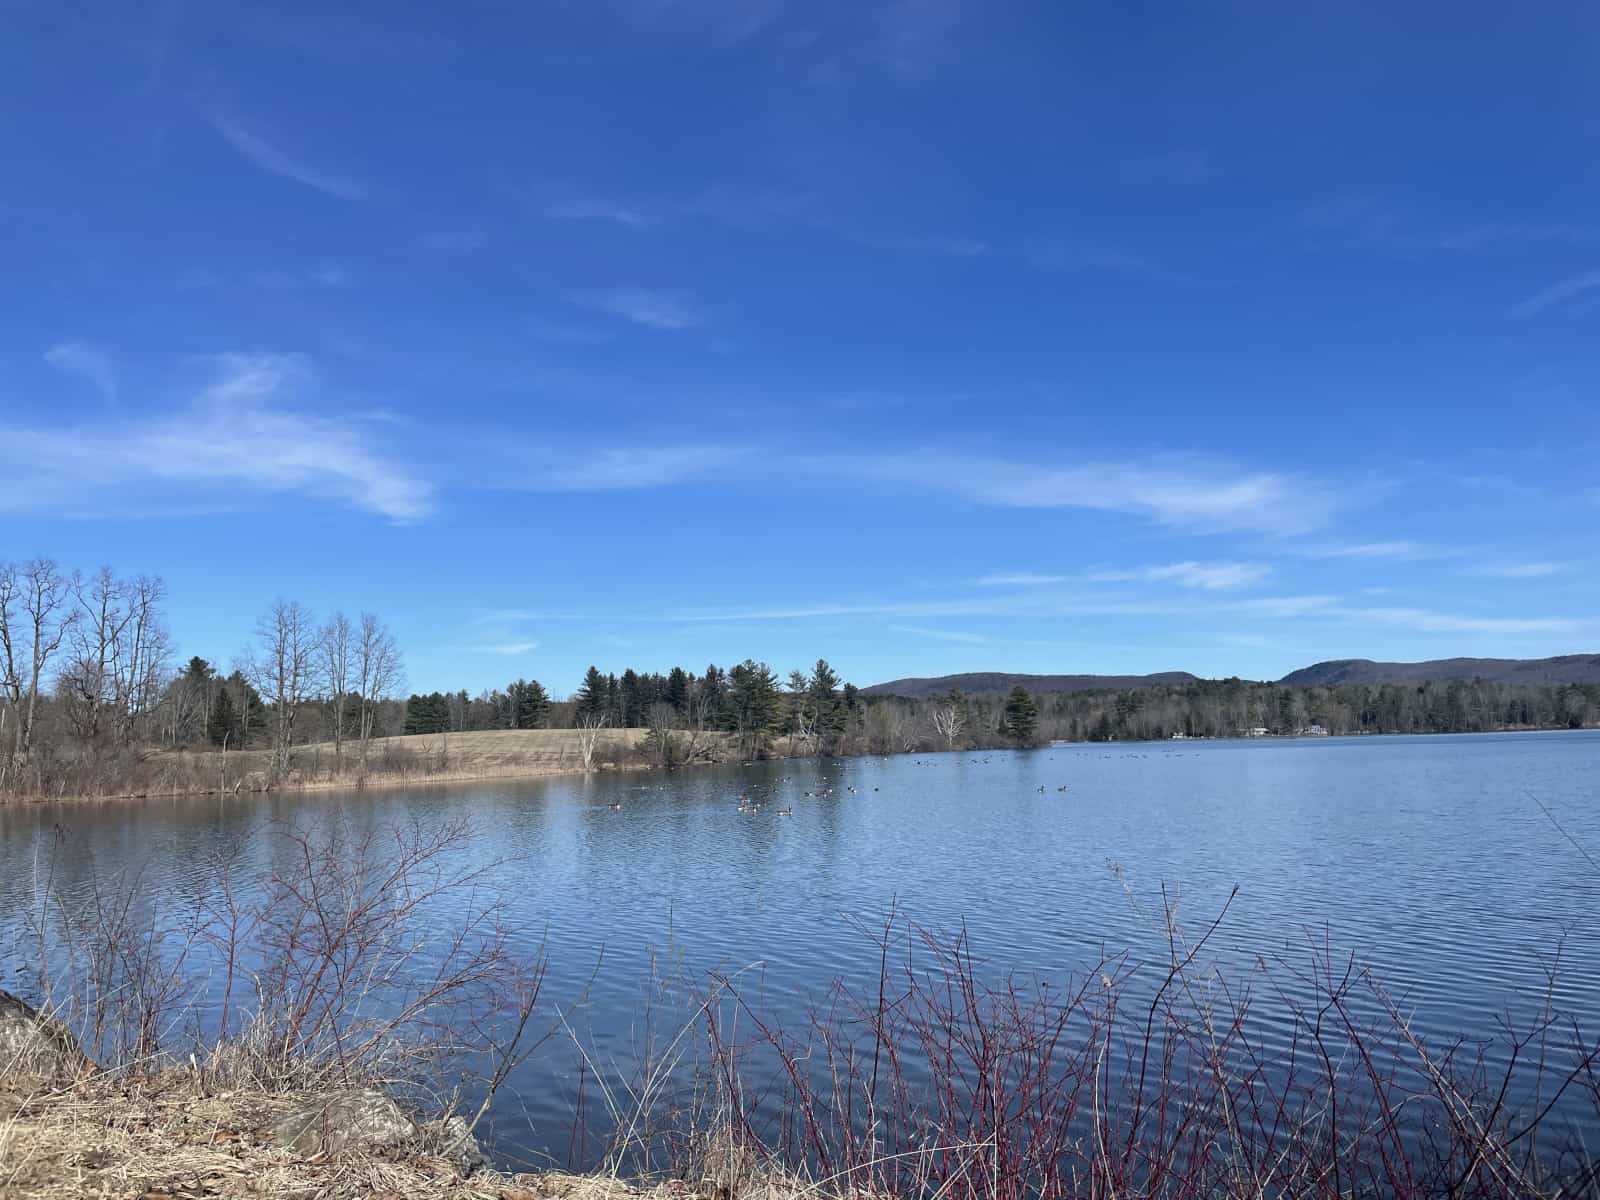 The hills reflect in Laurel Lake on a still blue-sky early spring day.